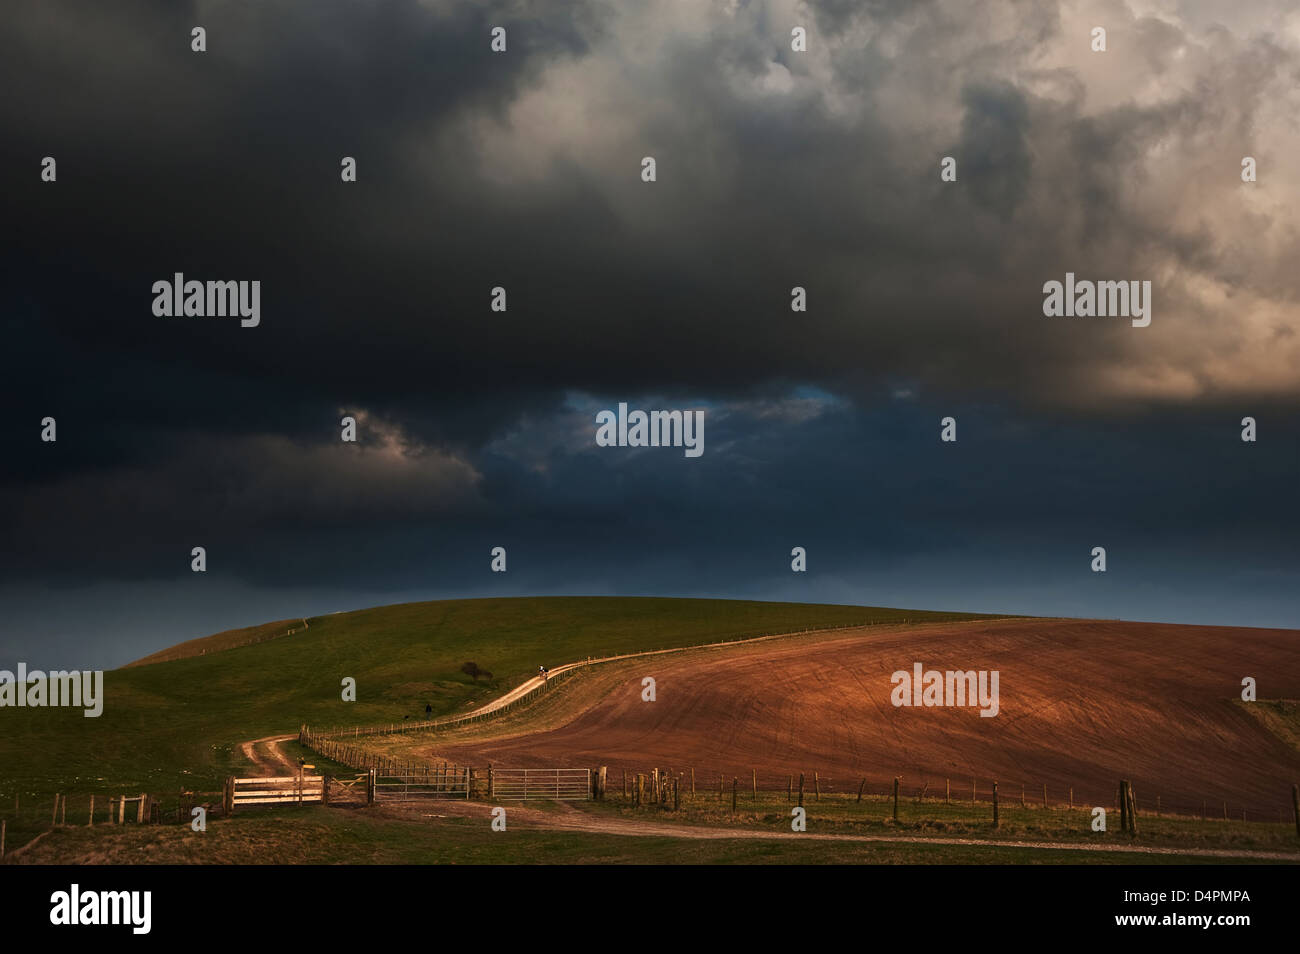 Beautiful countryside landscape across rolling hills with lovely cloud formations Stock Photo